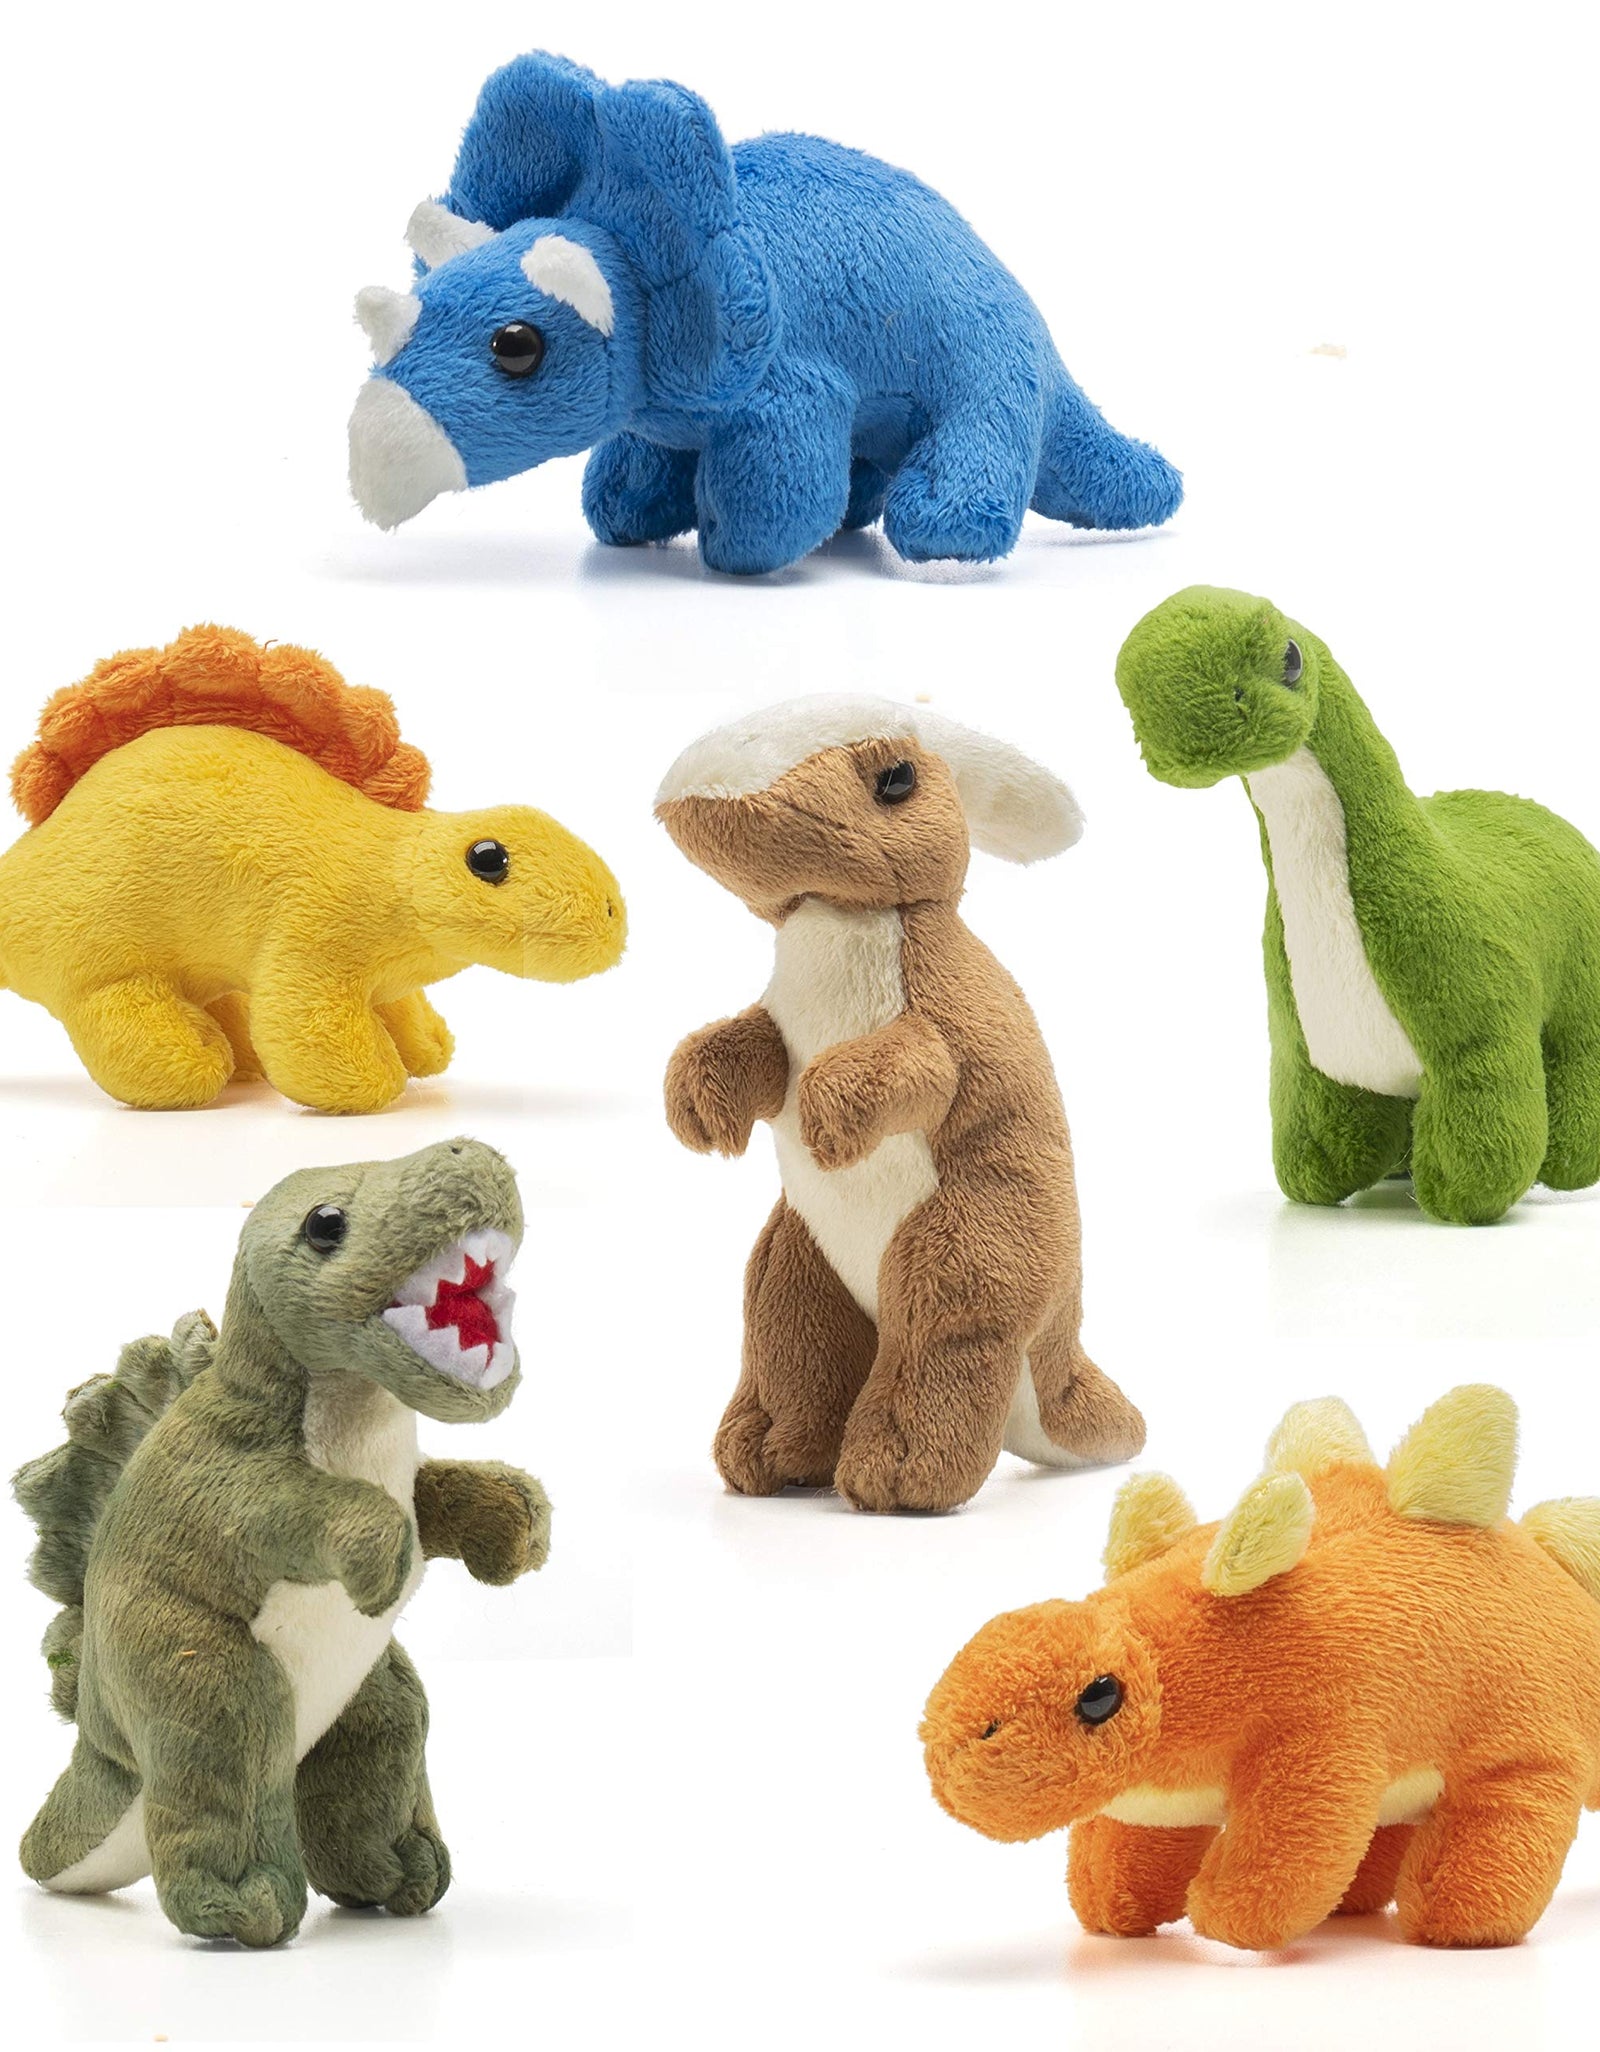 Prextex 15 inch Plush Dinosaur Stuffed Animal T-Rex Tummy Carrier with 5 Cute Little Hatchlings Inside its Zippered Tummy Great Set for Kids